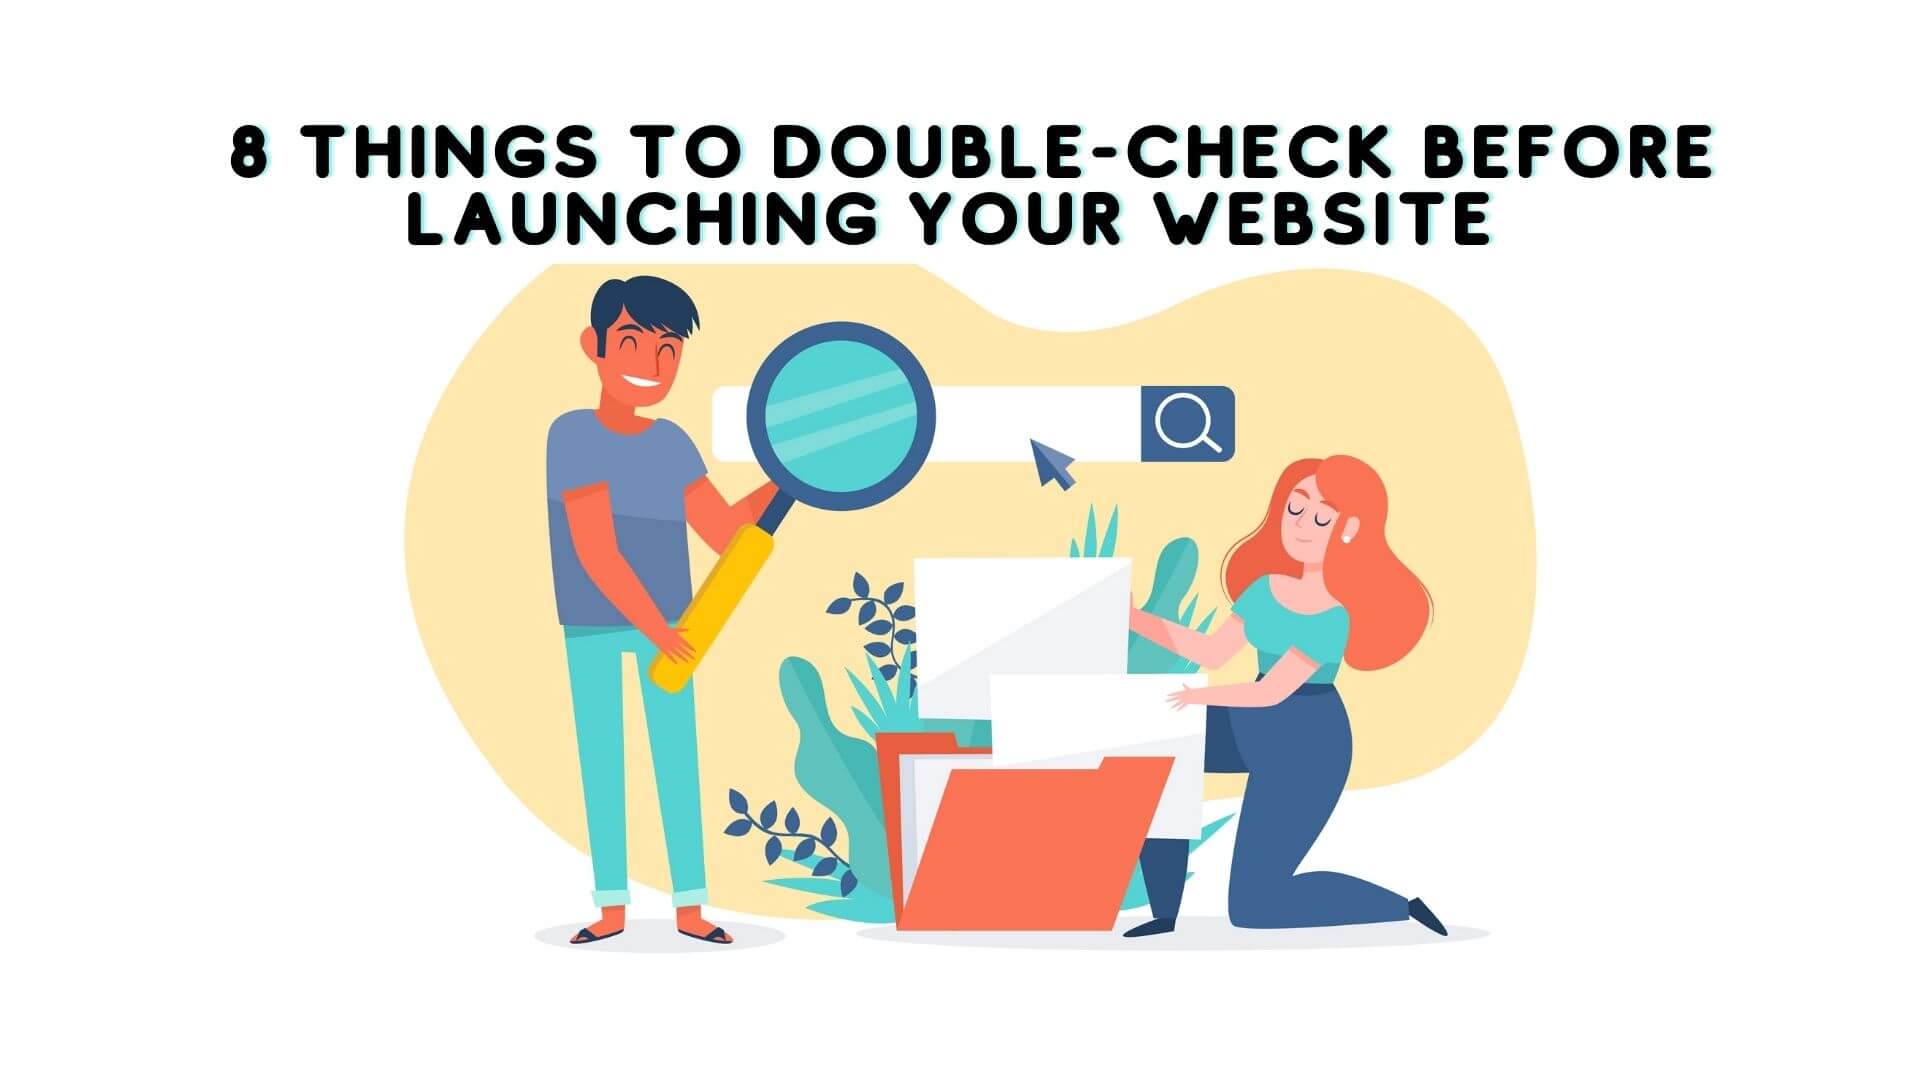 A check-list to keep in mind before launching your website